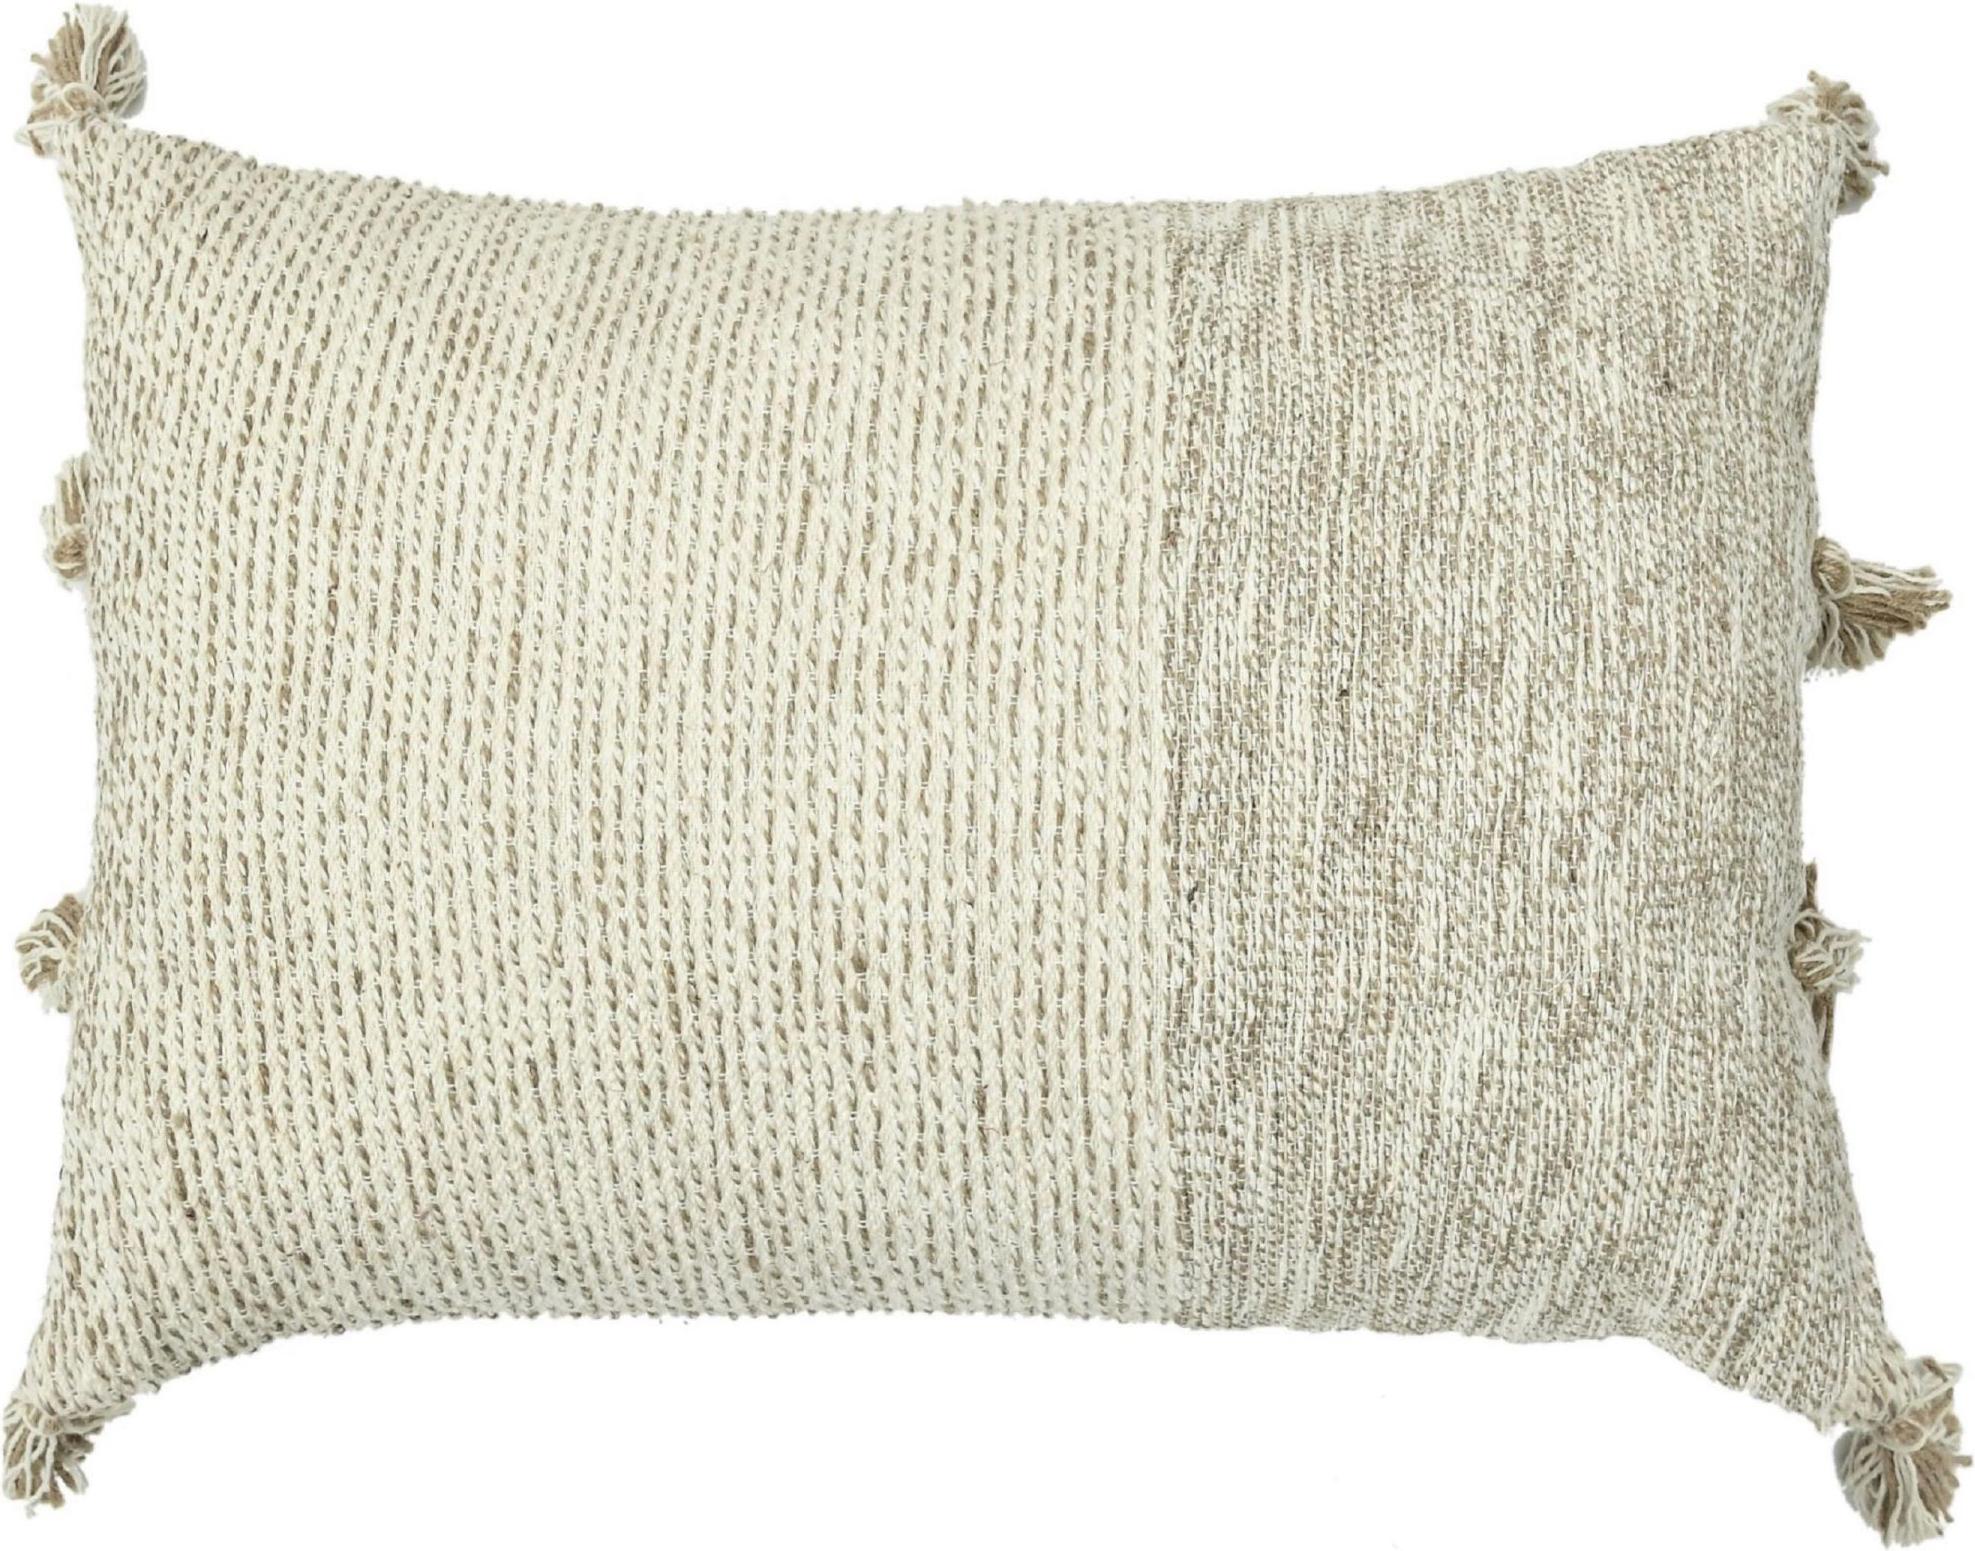 Hand-Knotted Boho Chic Style Contemporary Wool and Cotton Pillow In Beige For Sale